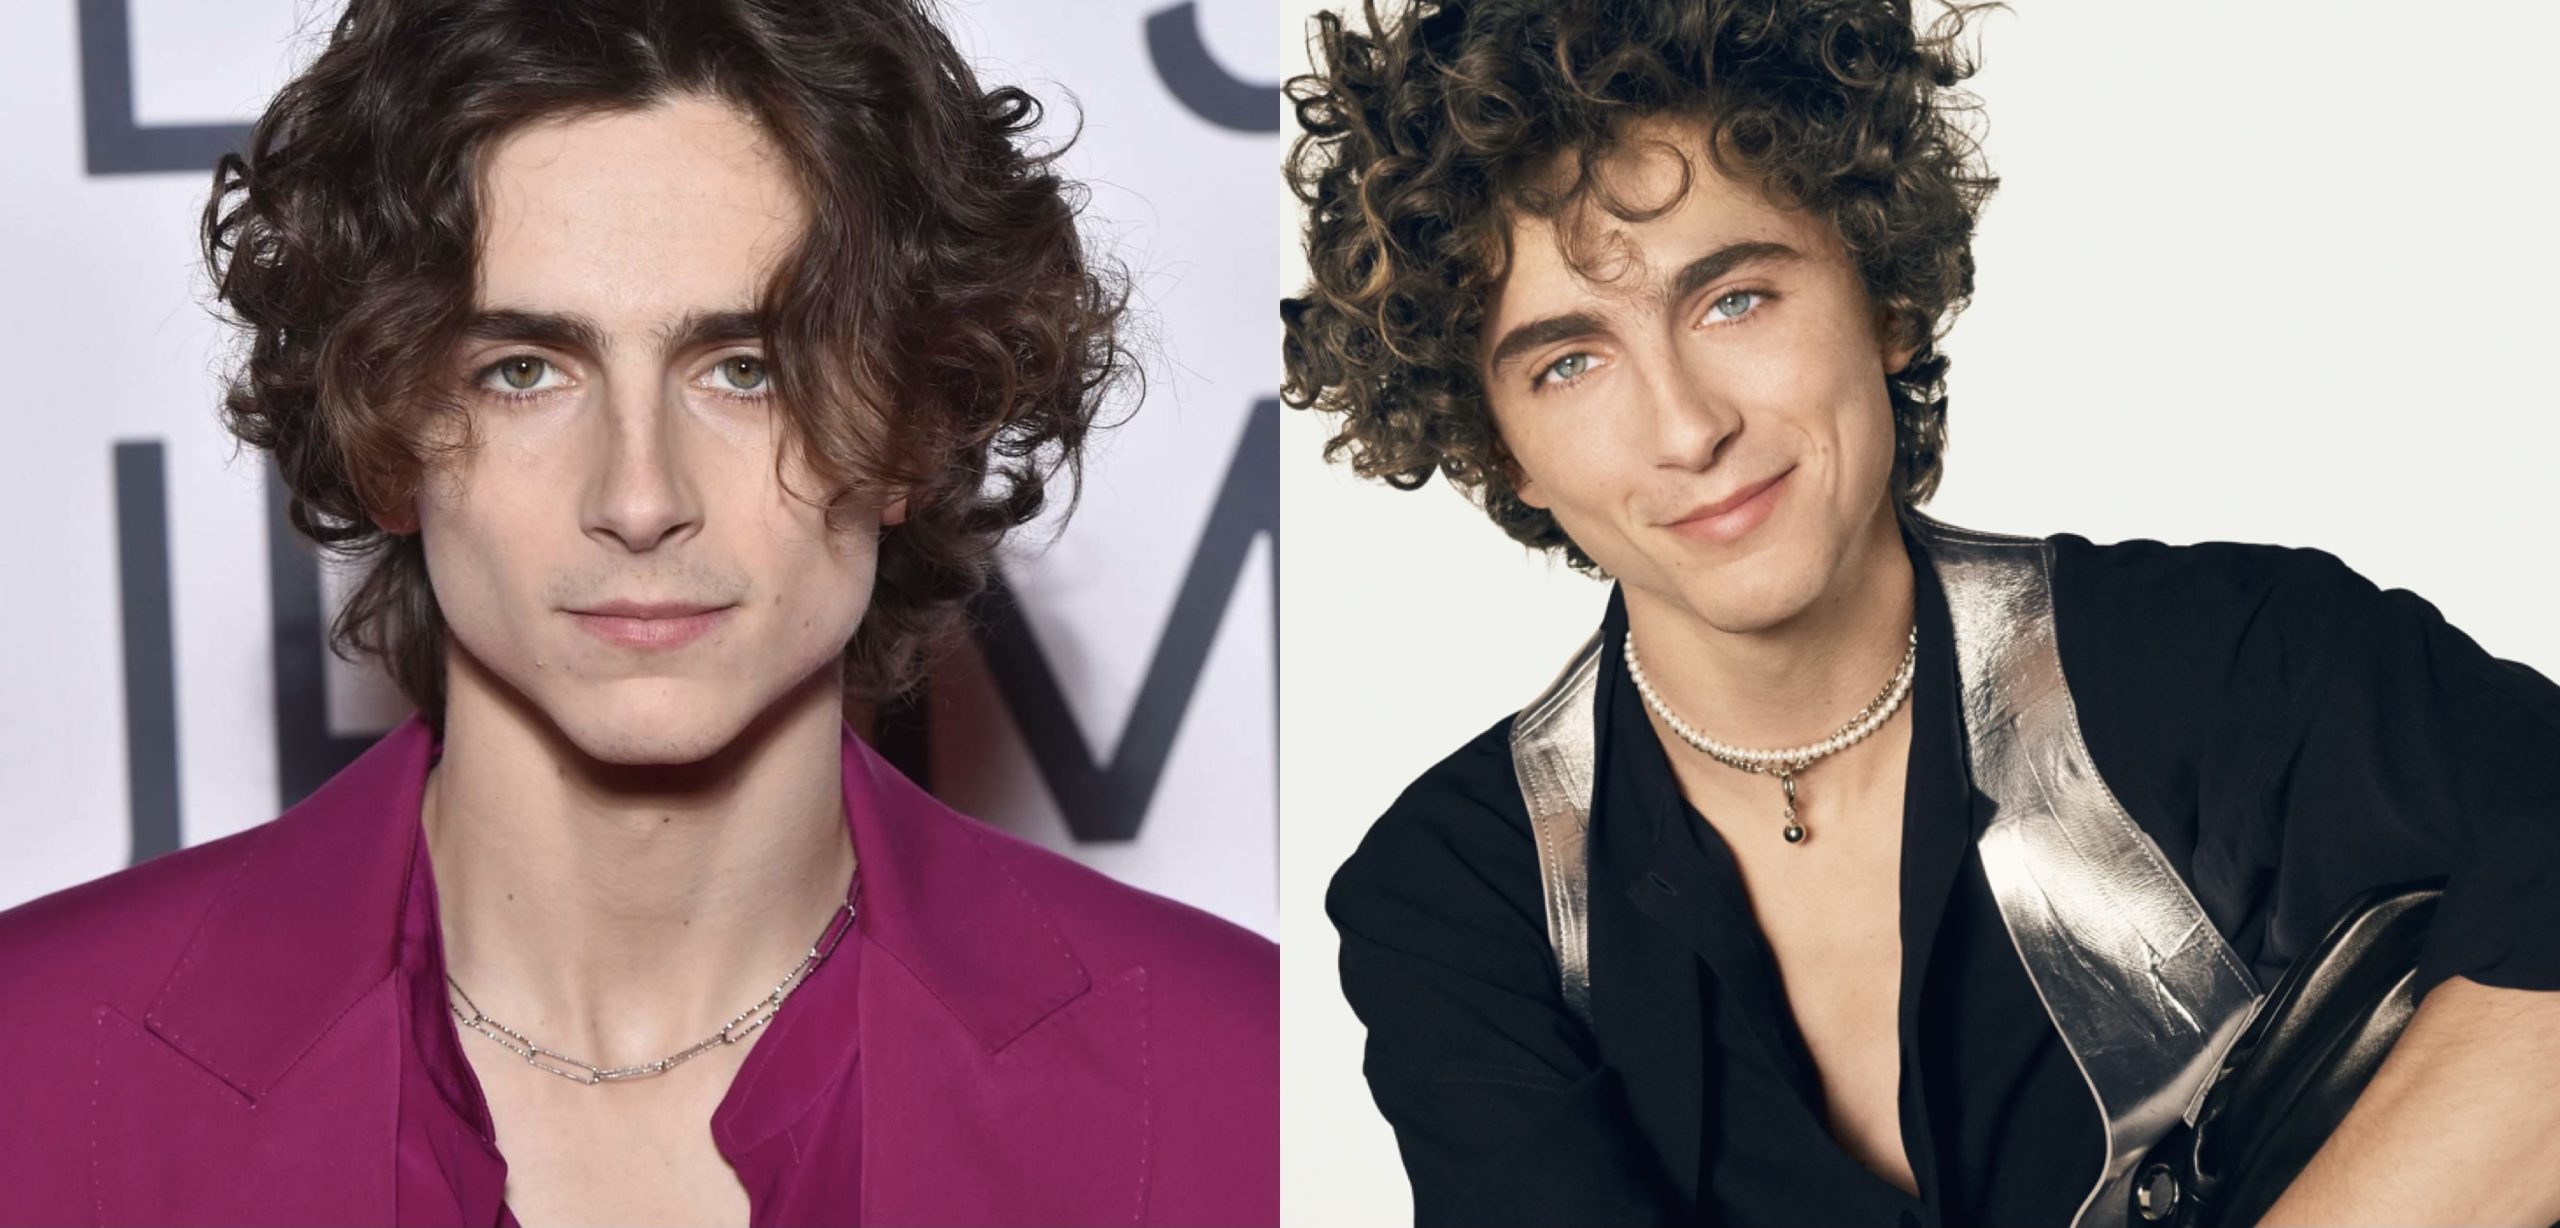 Who is Timothée Chalamet? Age, Height, Movies, Net Worth, Relationship ...